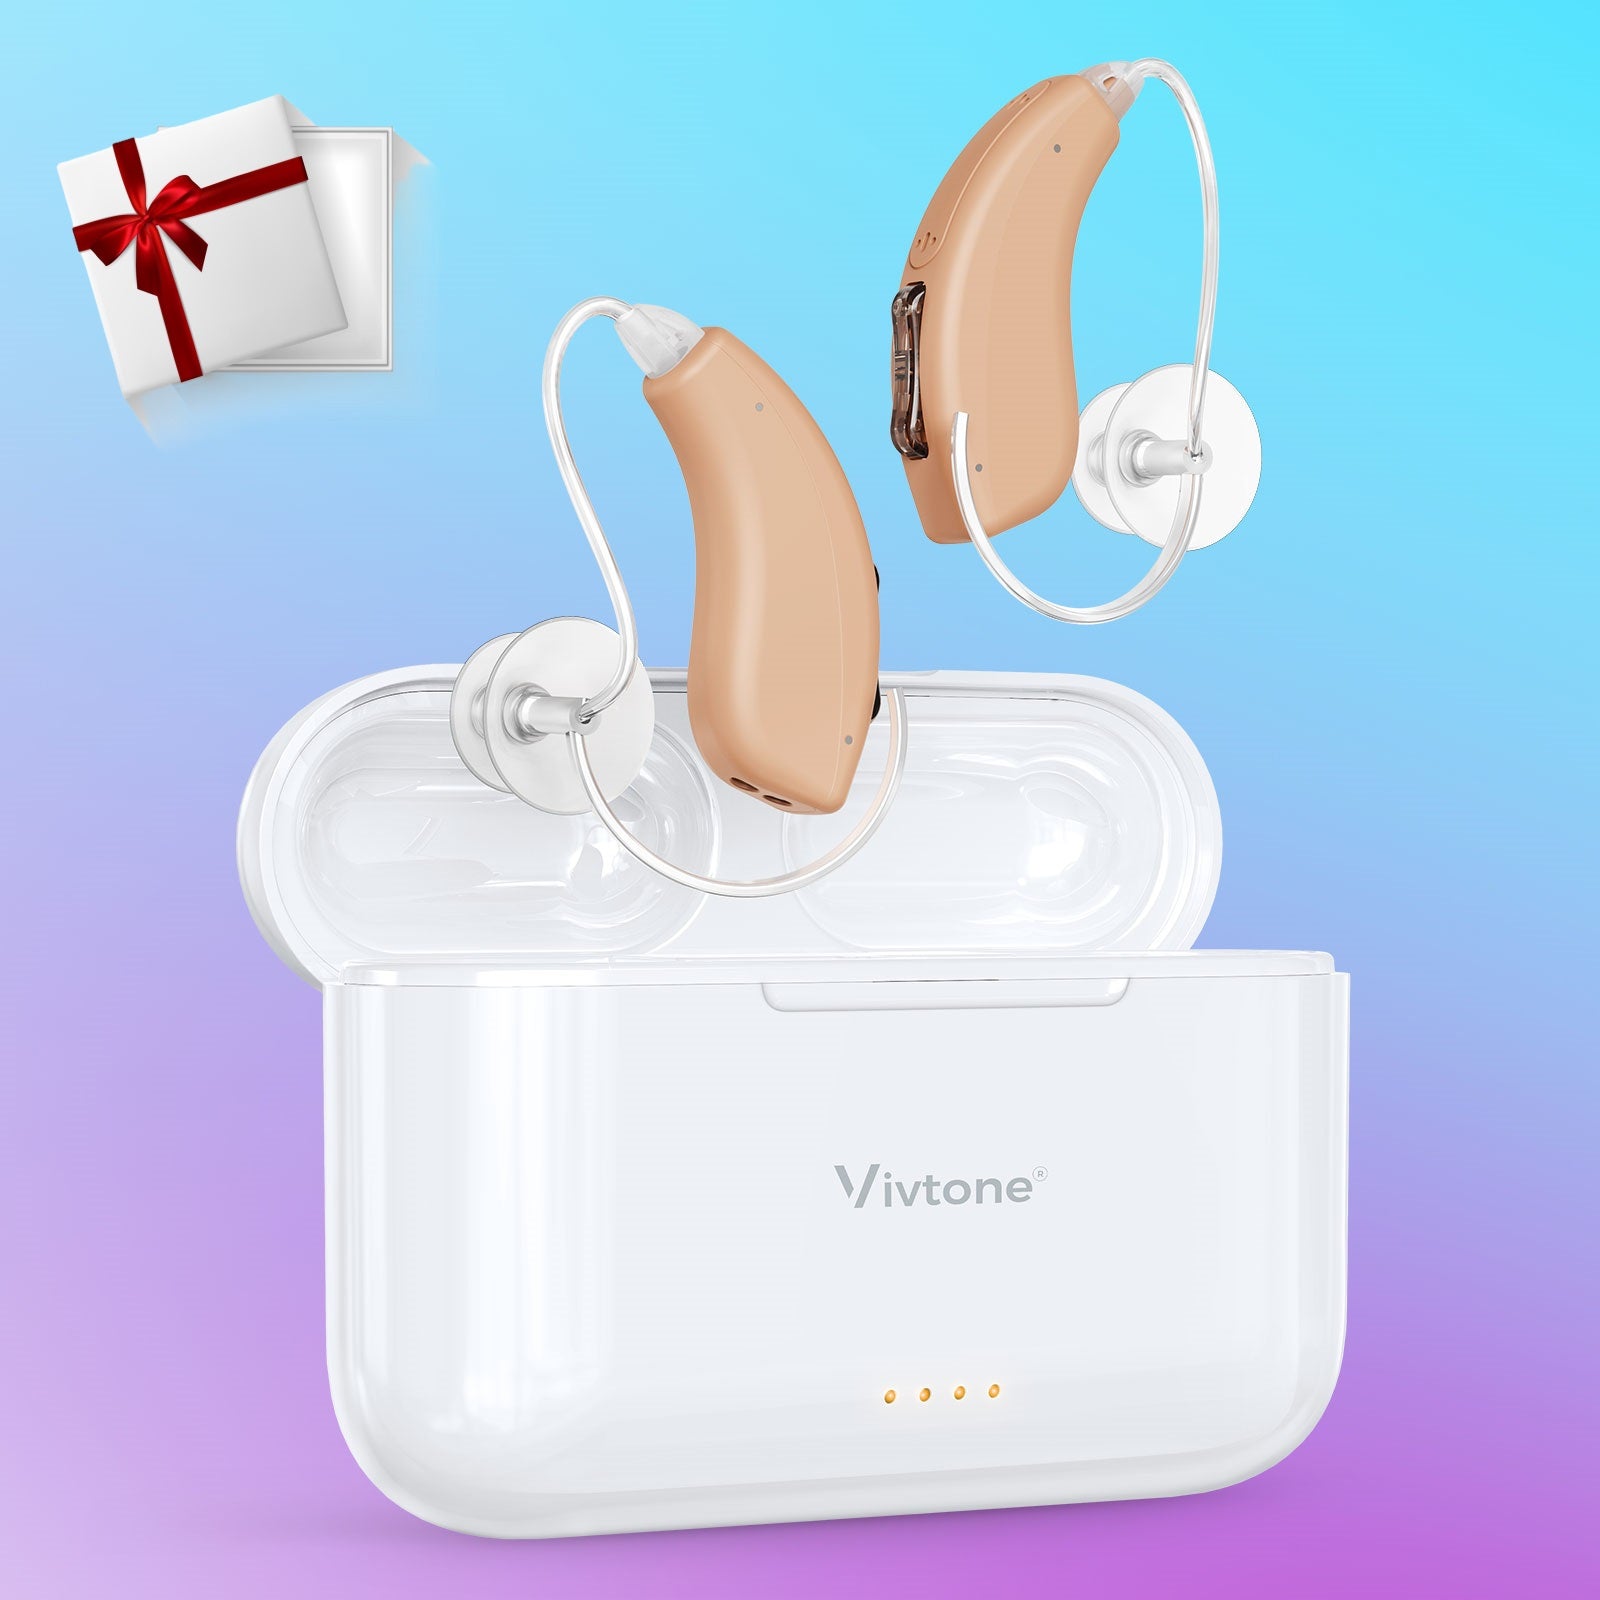 Rechargeable and Invisible Hearing Aids for Clarity, Leading Hearing Solutions:  Vivtone Lucid508c